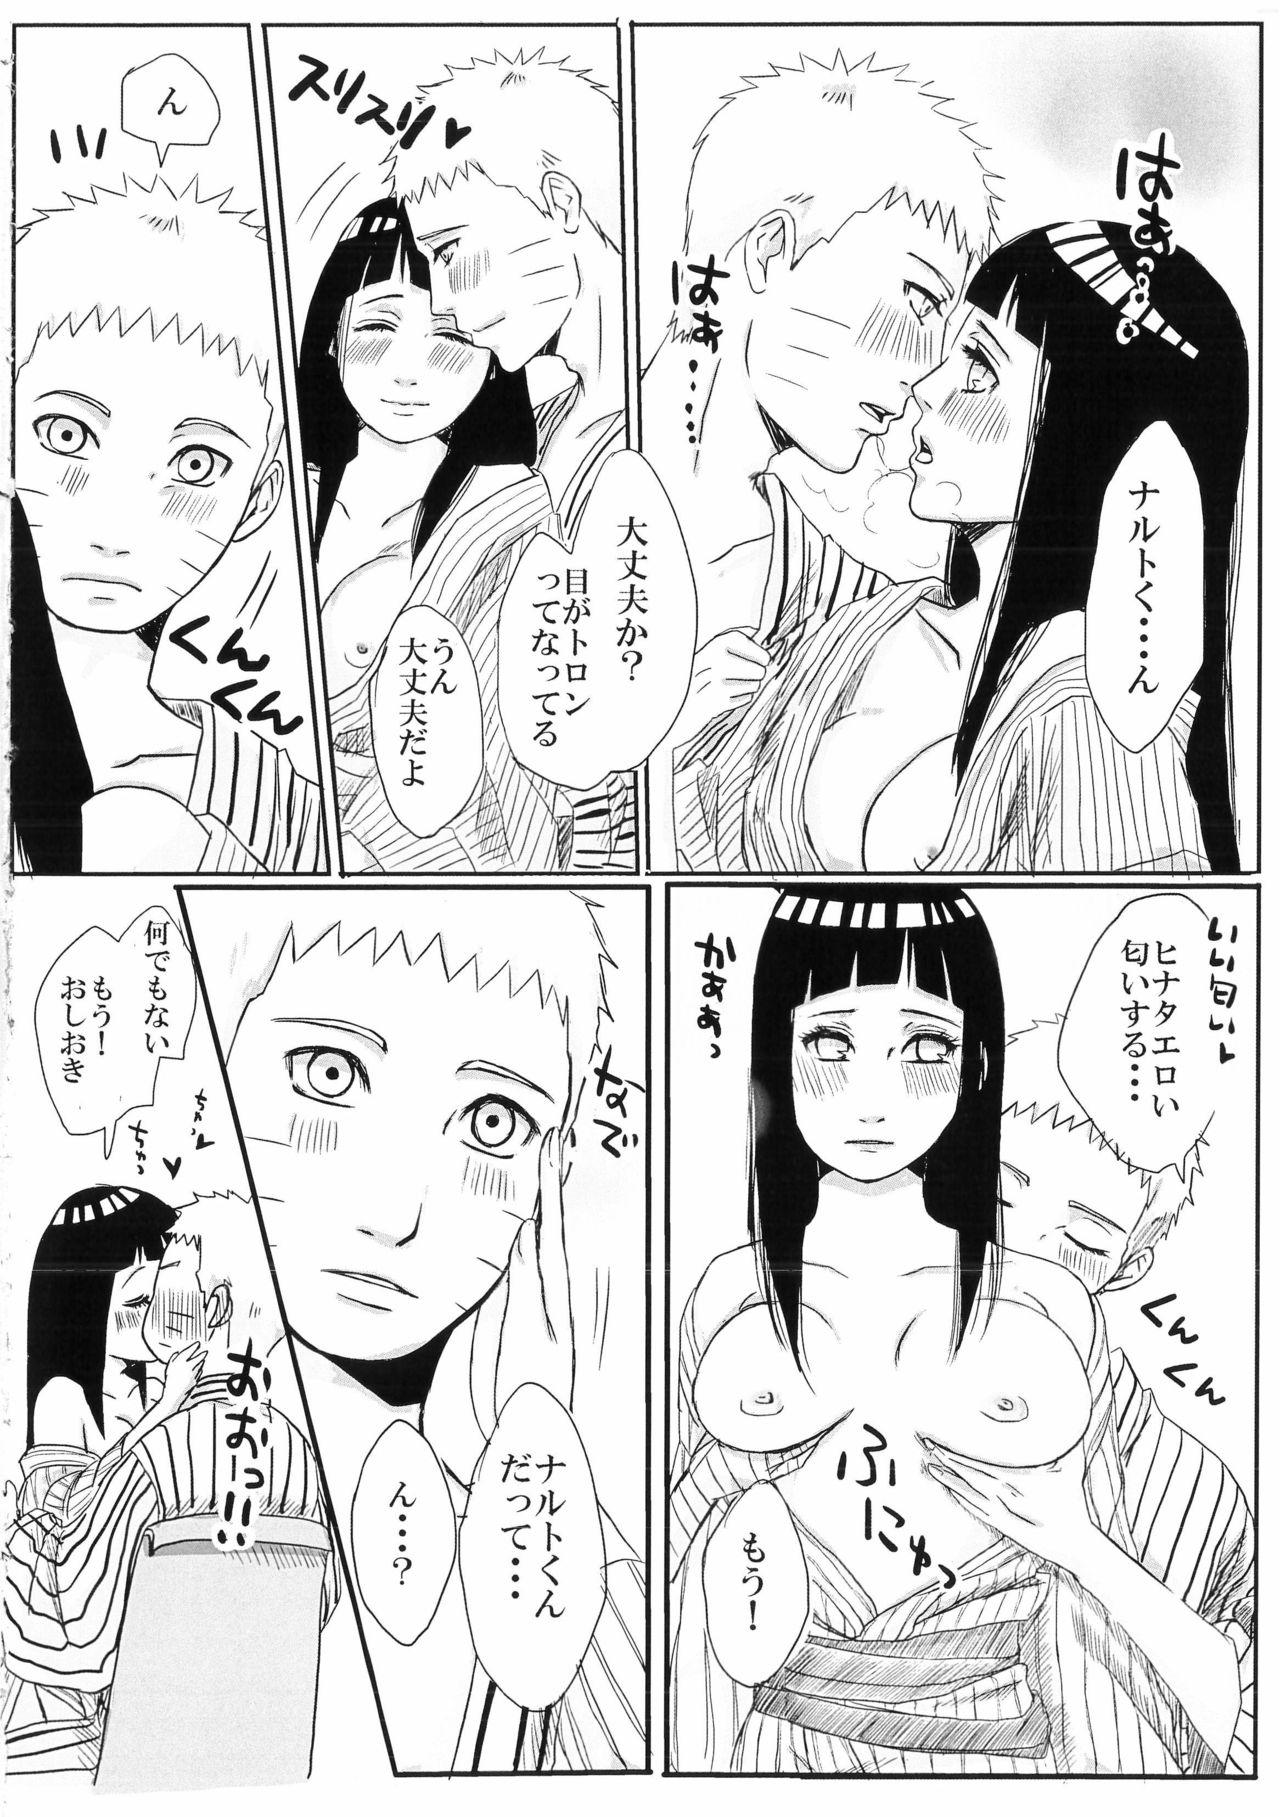 Cbt Before the wedding - Naruto Masterbate - Page 6